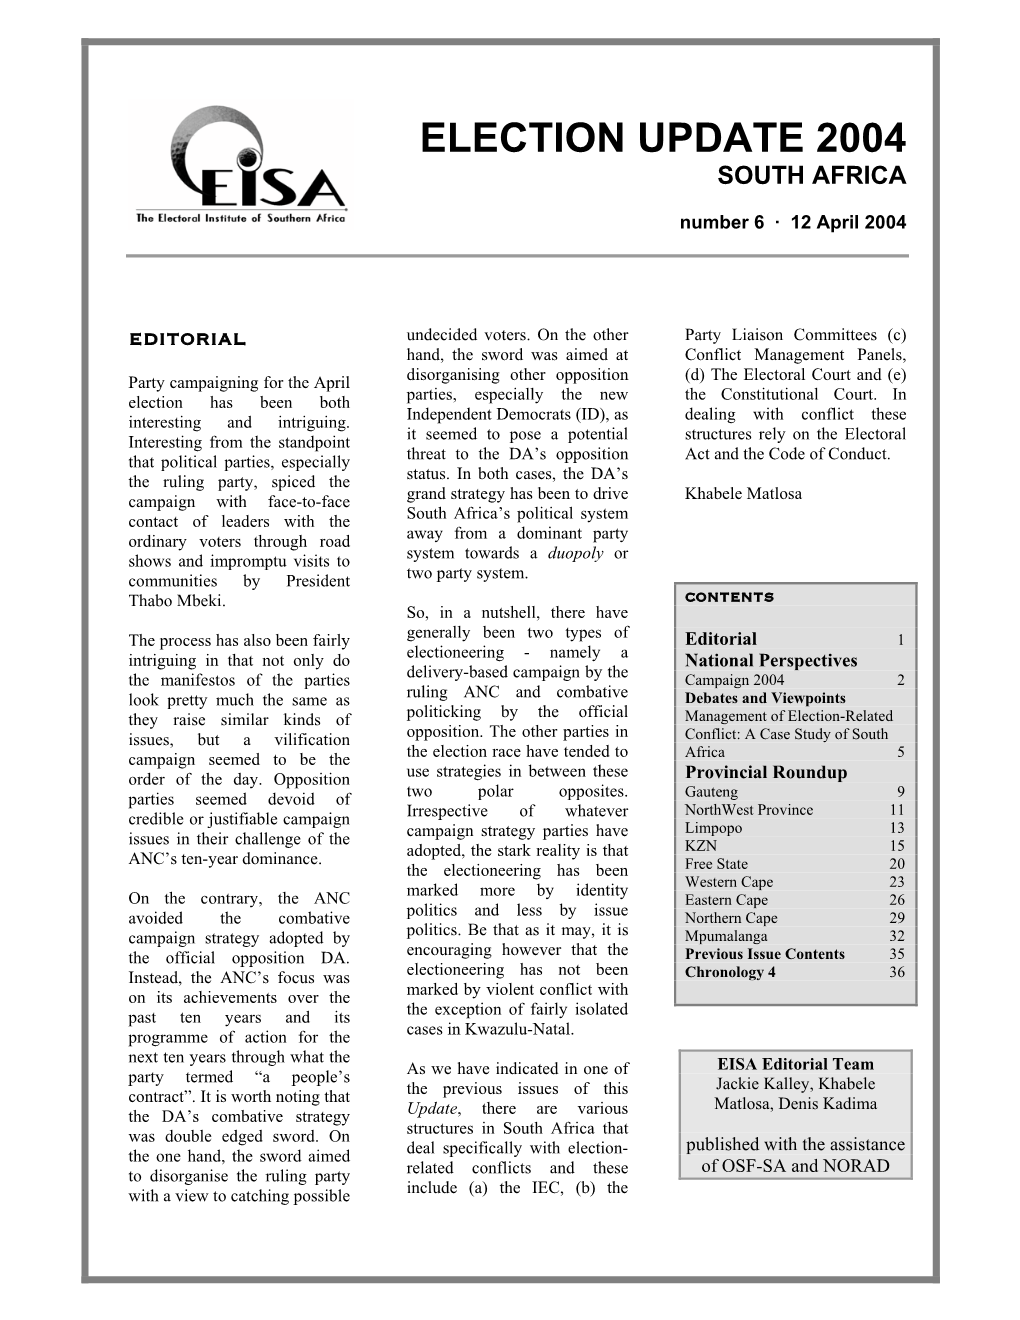 Election Update 2004 South Africa